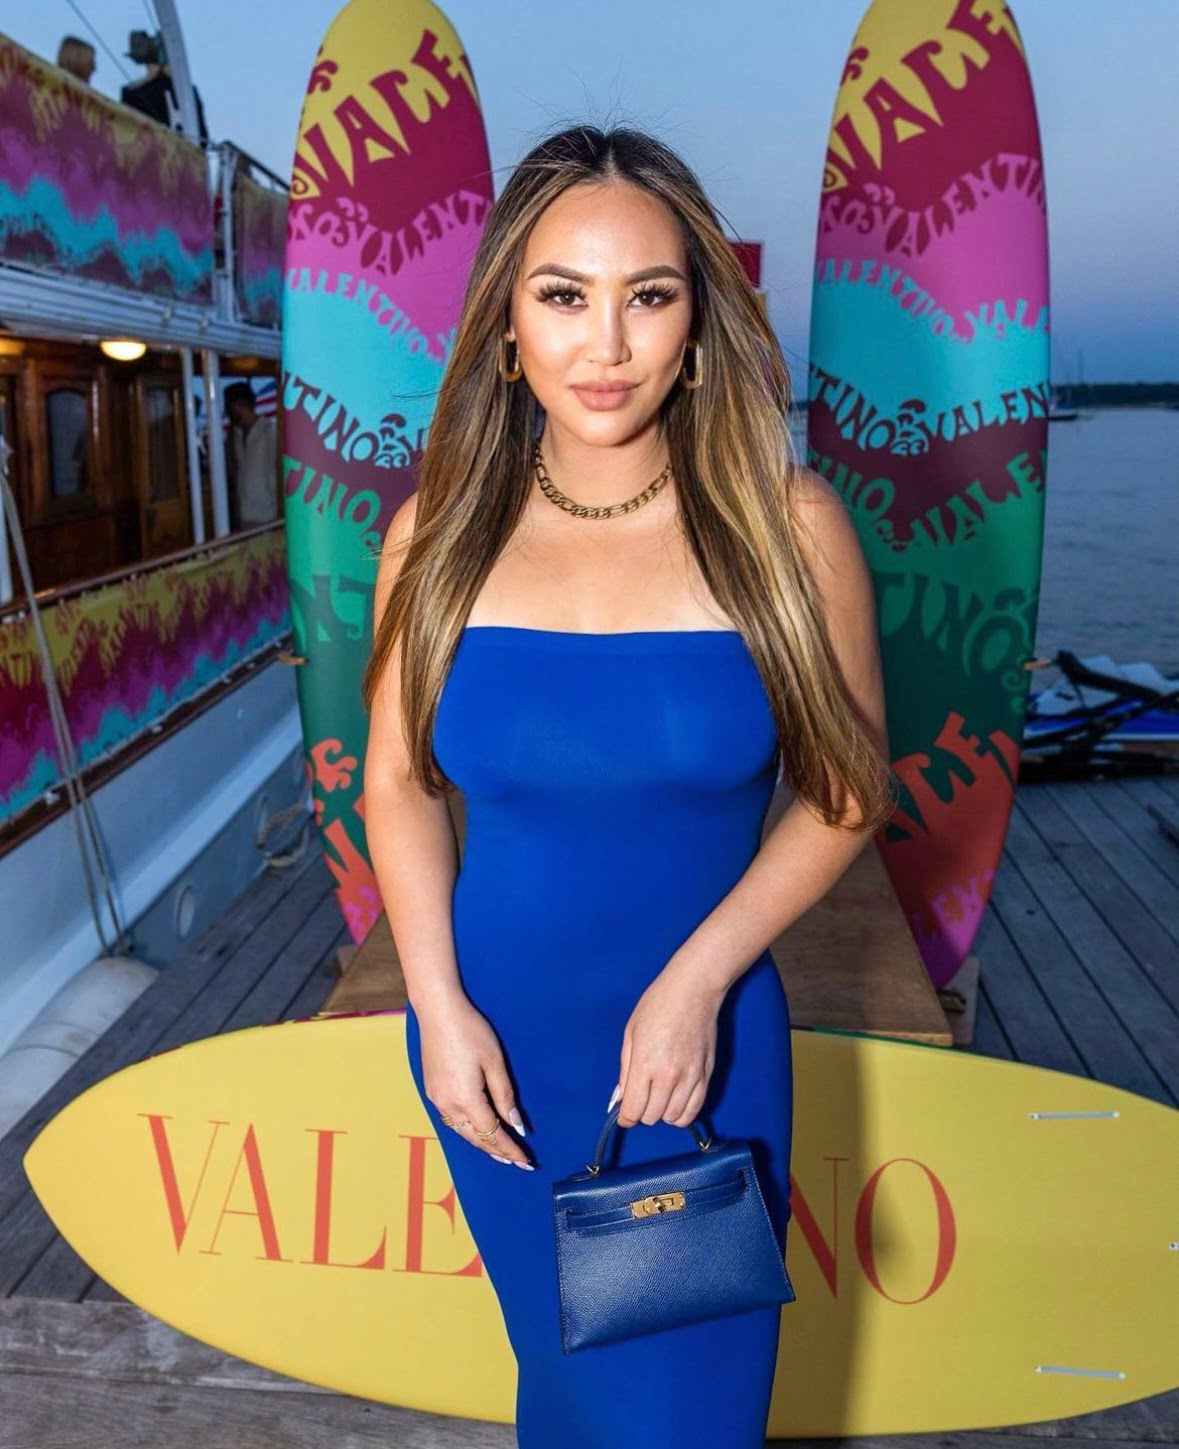 NetFlix Bling Empire NYC star Dorothy Wang at a Valentino event in front of surfboards and a boat. She is wearing a blue tube top body con dress. She is carrying an Hermes navy blue mini kelly with gold hardware.